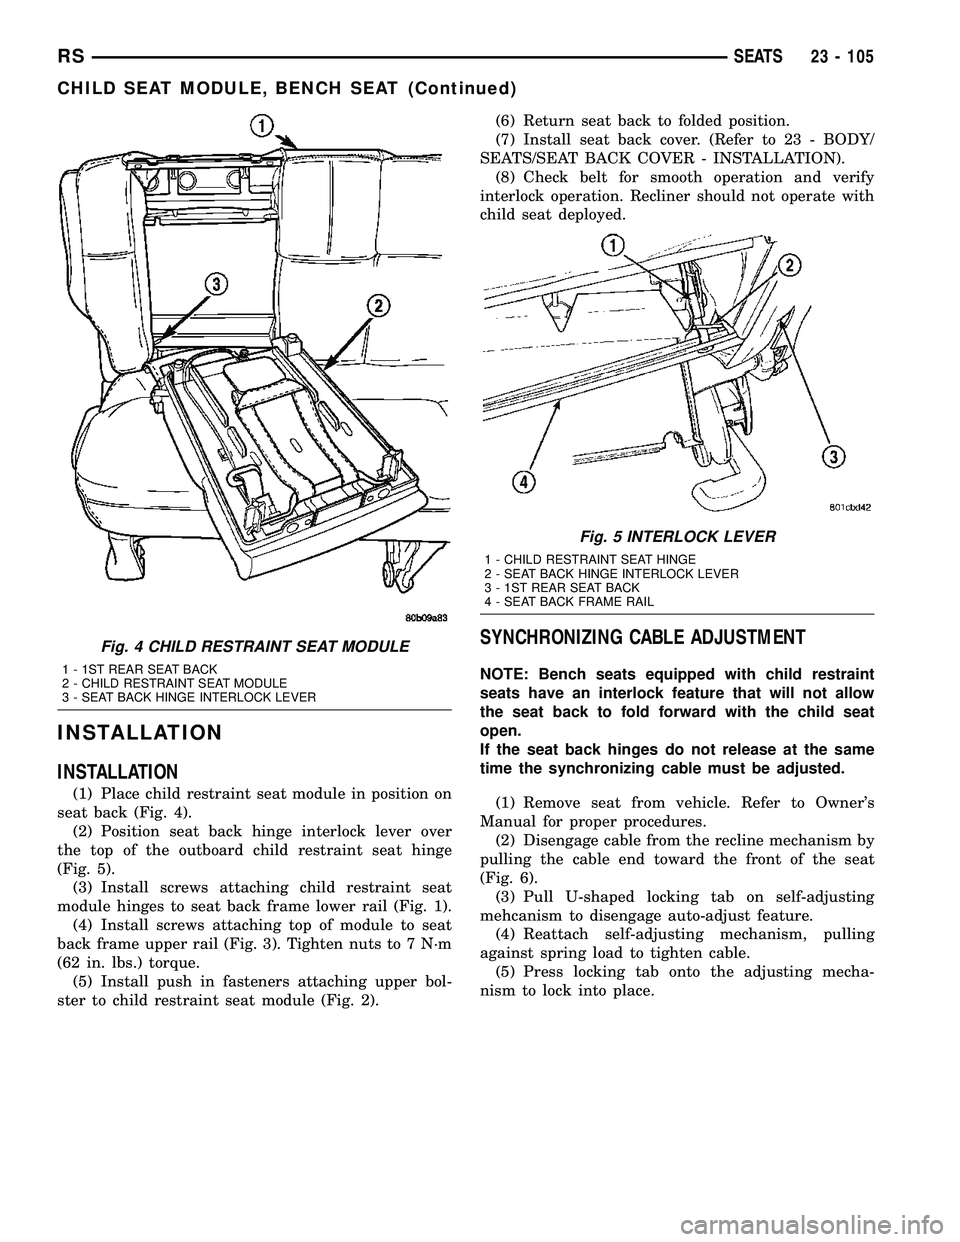 CHRYSLER VOYAGER 2005 User Guide INSTALLATION
INSTALLATION
(1) Place child restraint seat module in position on
seat back (Fig. 4).
(2) Position seat back hinge interlock lever over
the top of the outboard child restraint seat hinge
